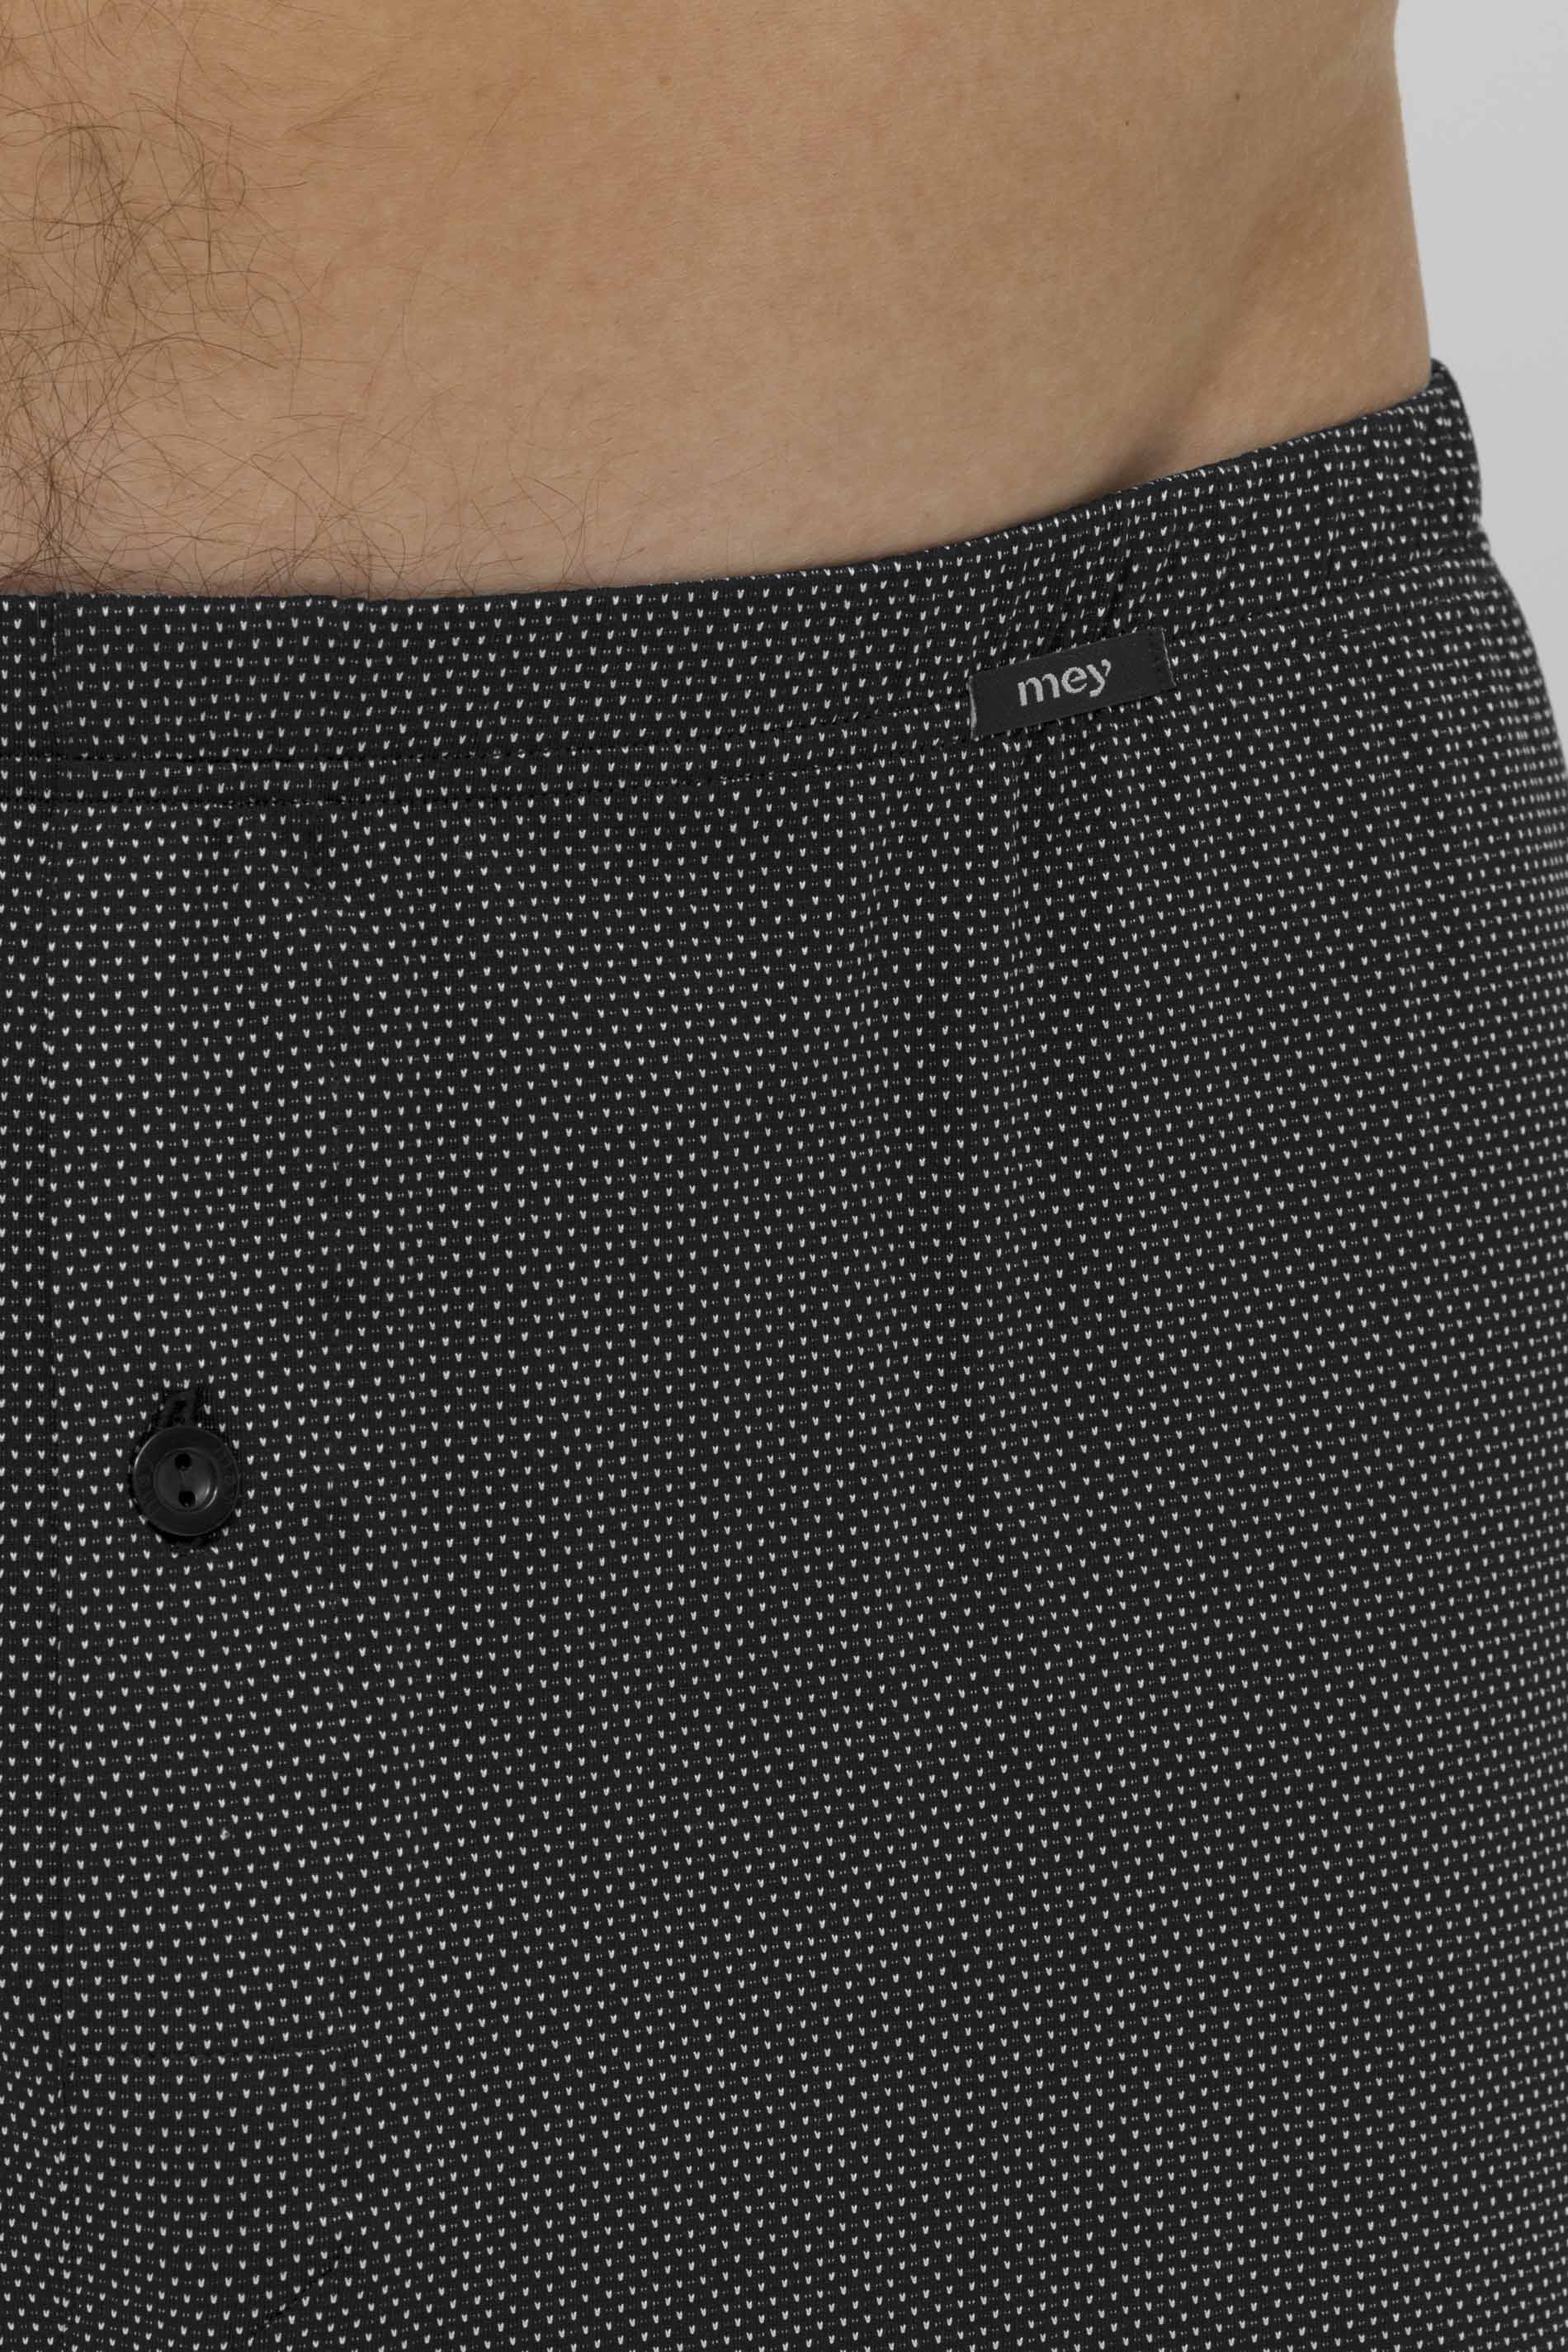 Boxershorts Serie BC Points Detailweergave 01 | mey®